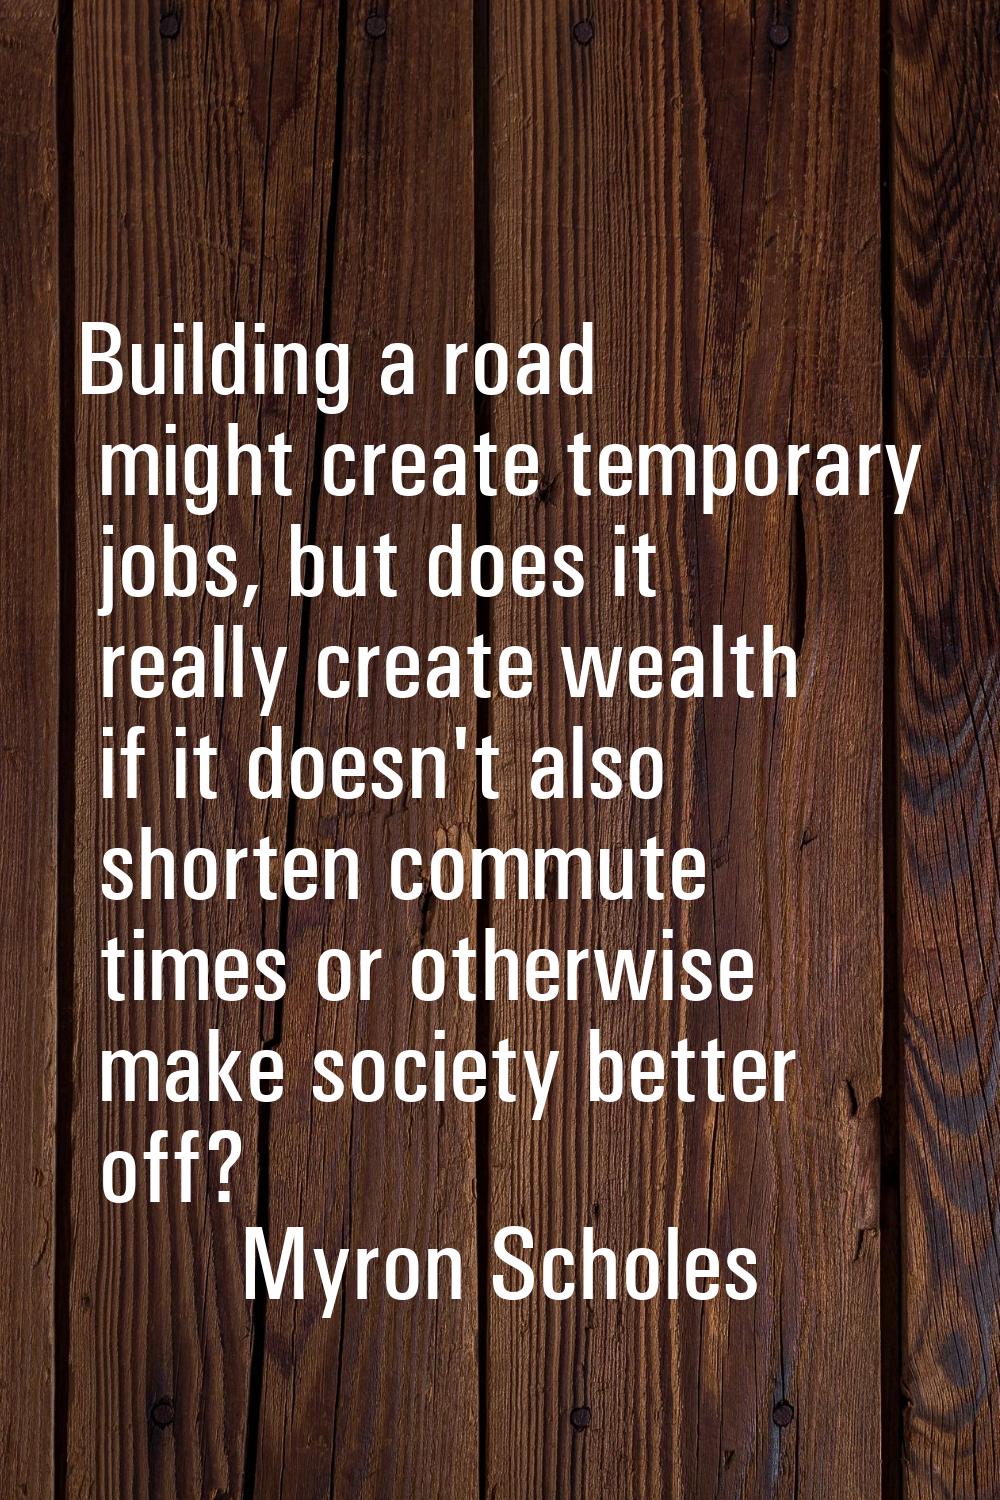 Building a road might create temporary jobs, but does it really create wealth if it doesn't also sh